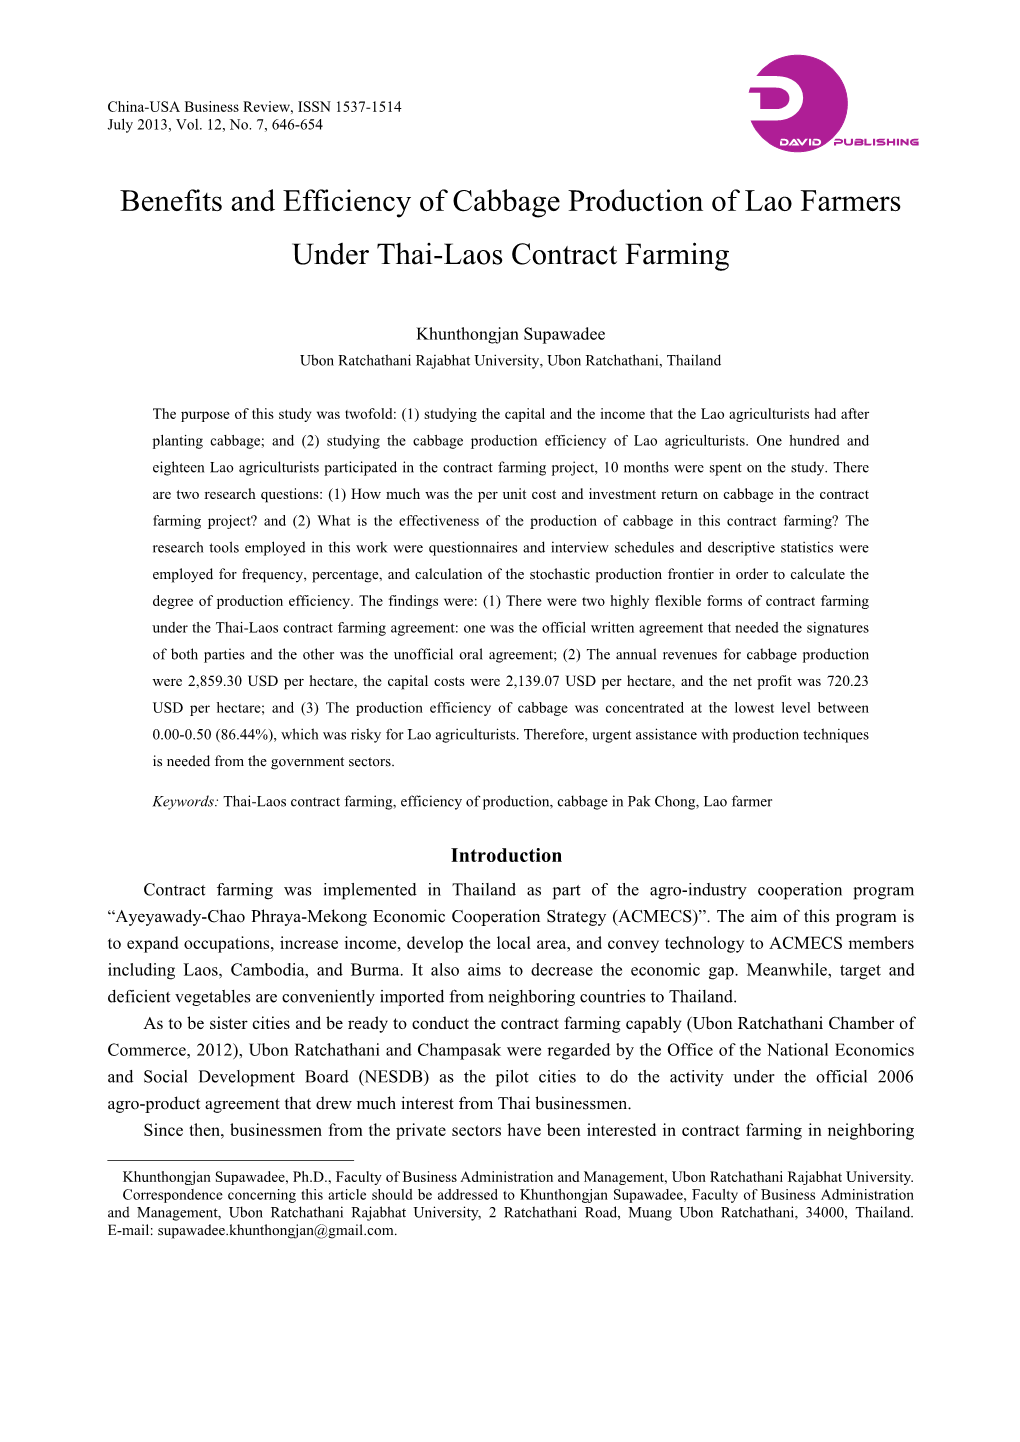 Benefits and Efficiency of Cabbage Production of Lao Farmers Under Thai-Laos Contract Farming